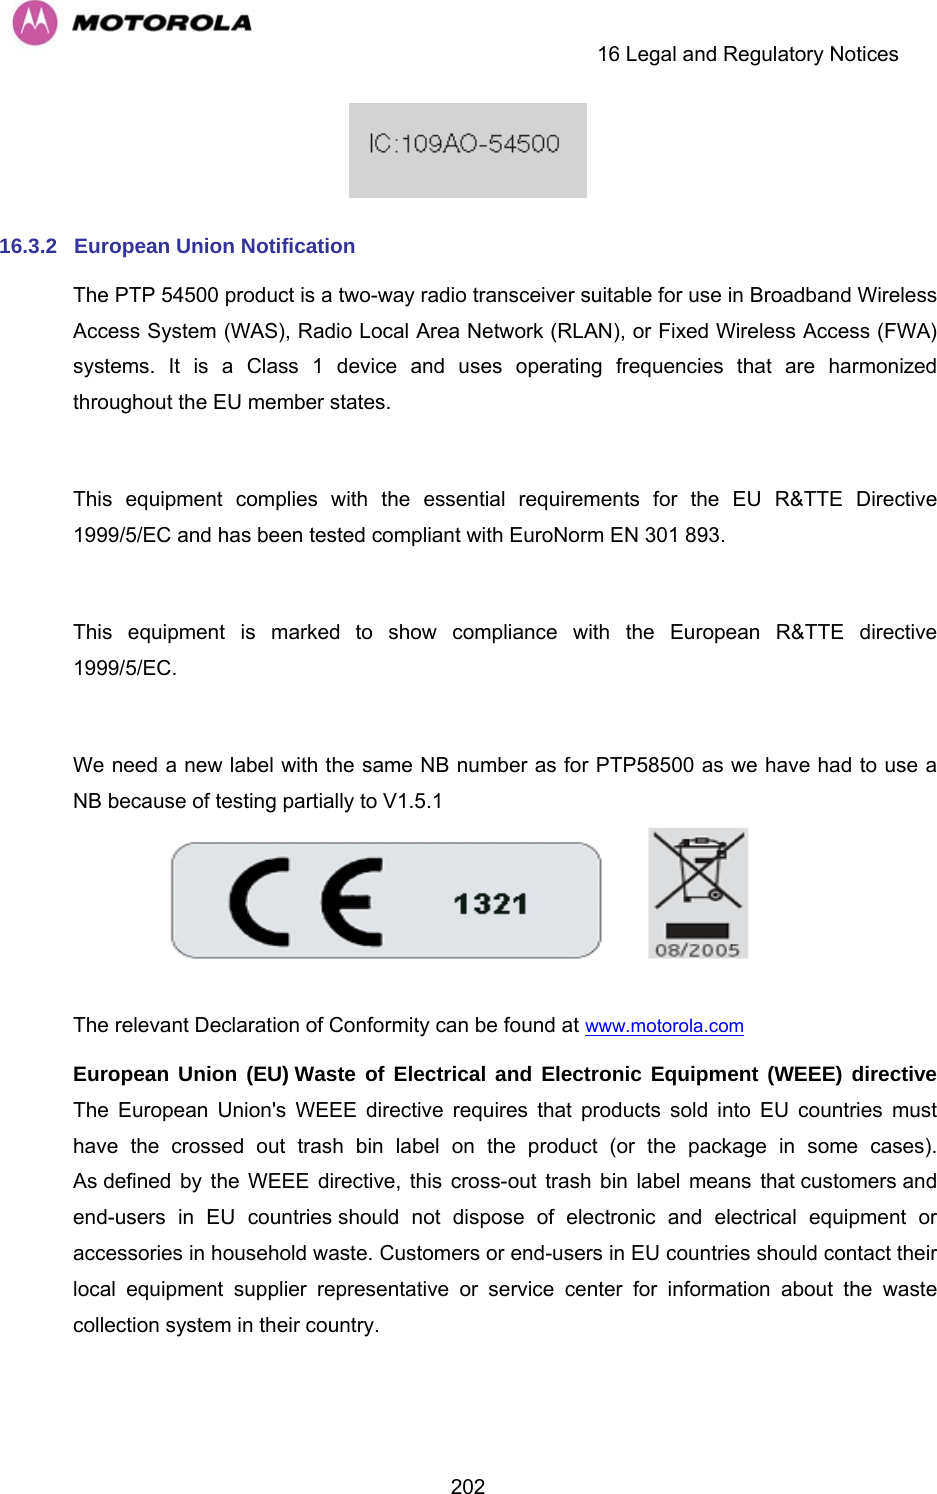     16 Legal and Regulatory Notices  202 16.3.2  European Union Notification The PTP 54500 product is a two-way radio transceiver suitable for use in Broadband Wireless Access System (WAS), Radio Local Area Network (RLAN), or Fixed Wireless Access (FWA) systems. It is a Class 1 device and uses operating frequencies that are harmonized throughout the EU member states.   This equipment complies with the essential requirements for the EU R&amp;TTE Directive 1999/5/EC and has been tested compliant with EuroNorm EN 301 893.   This equipment is marked to show compliance with the European R&amp;TTE directive 1999/5/EC.  We need a new label with the same NB number as for PTP58500 as we have had to use a NB because of testing partially to V1.5.1  The relevant Declaration of Conformity can be found at www.motorola.com  European Union (EU) Waste of Electrical and Electronic Equipment (WEEE) directive The European Union&apos;s WEEE directive requires that products sold into EU countries must have the crossed out trash bin label on the product (or the package in some cases). As defined by the WEEE directive, this cross-out trash bin label means that customers and end-users in EU countries should not dispose of electronic and electrical equipment or accessories in household waste. Customers or end-users in EU countries should contact their local equipment supplier representative or service center for information about the waste collection system in their country.  